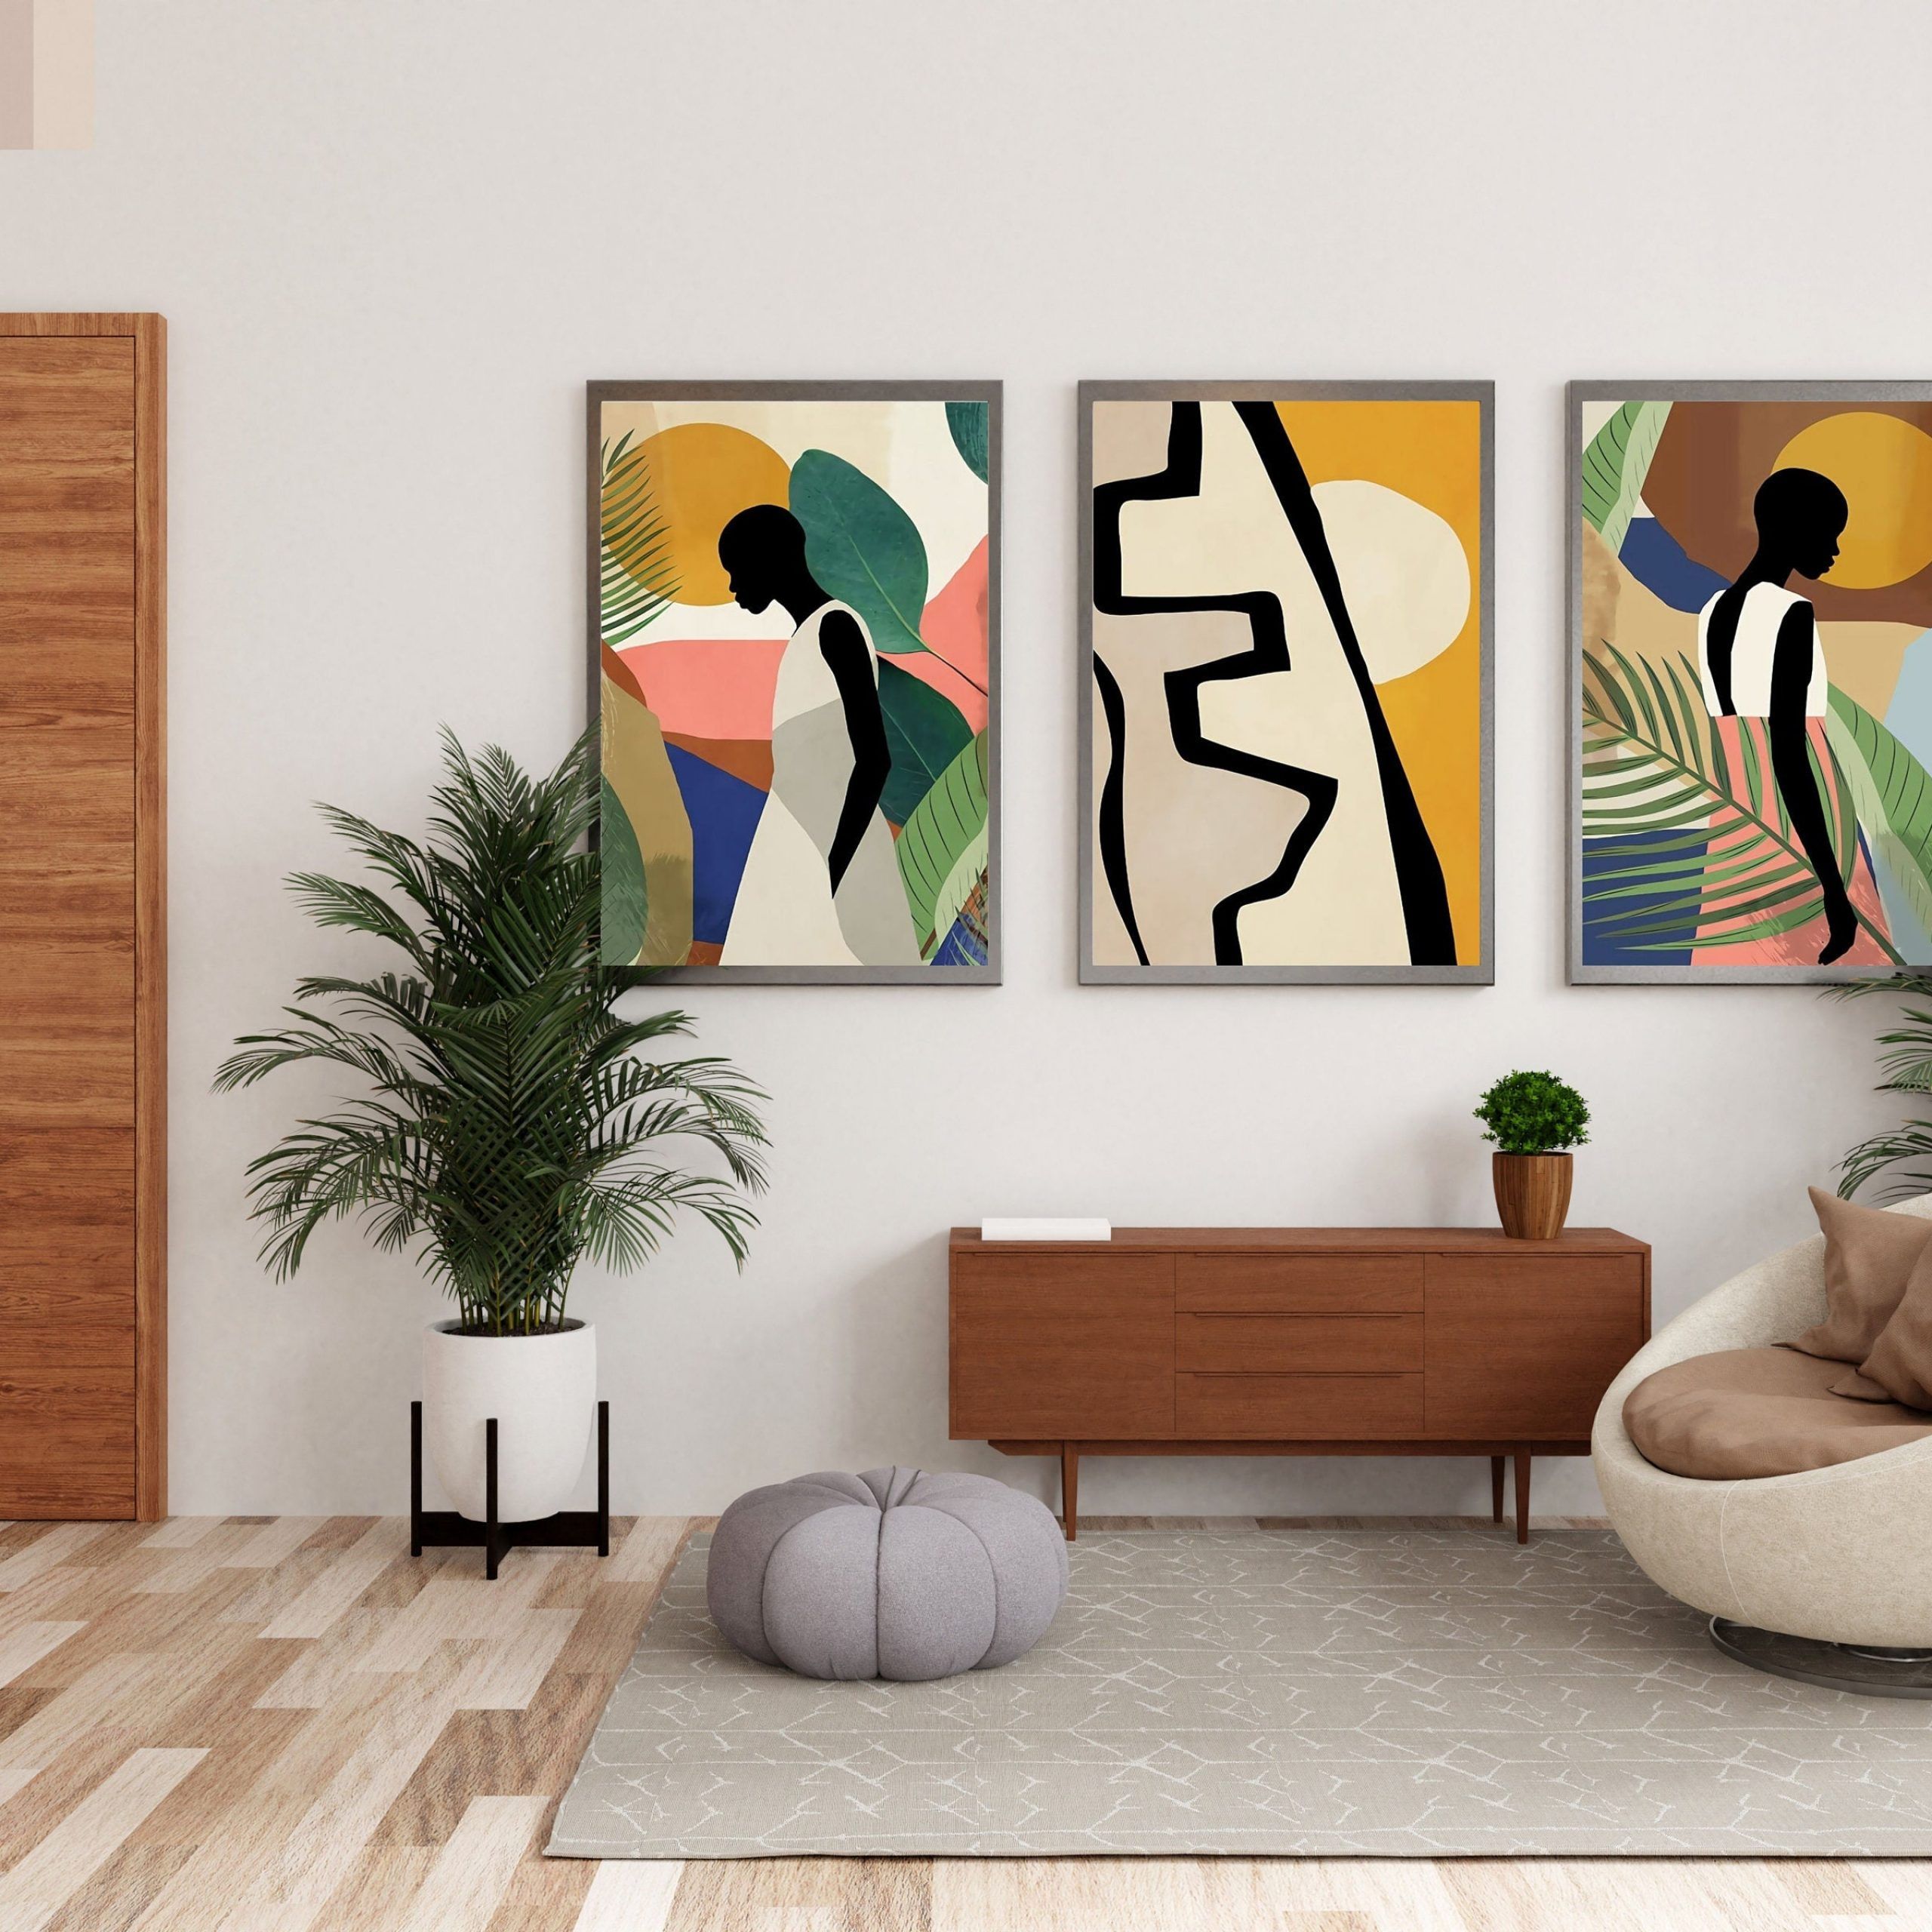 Inspired Wall Art Within Popular African Wall Art – Etsy (View 8 of 15)